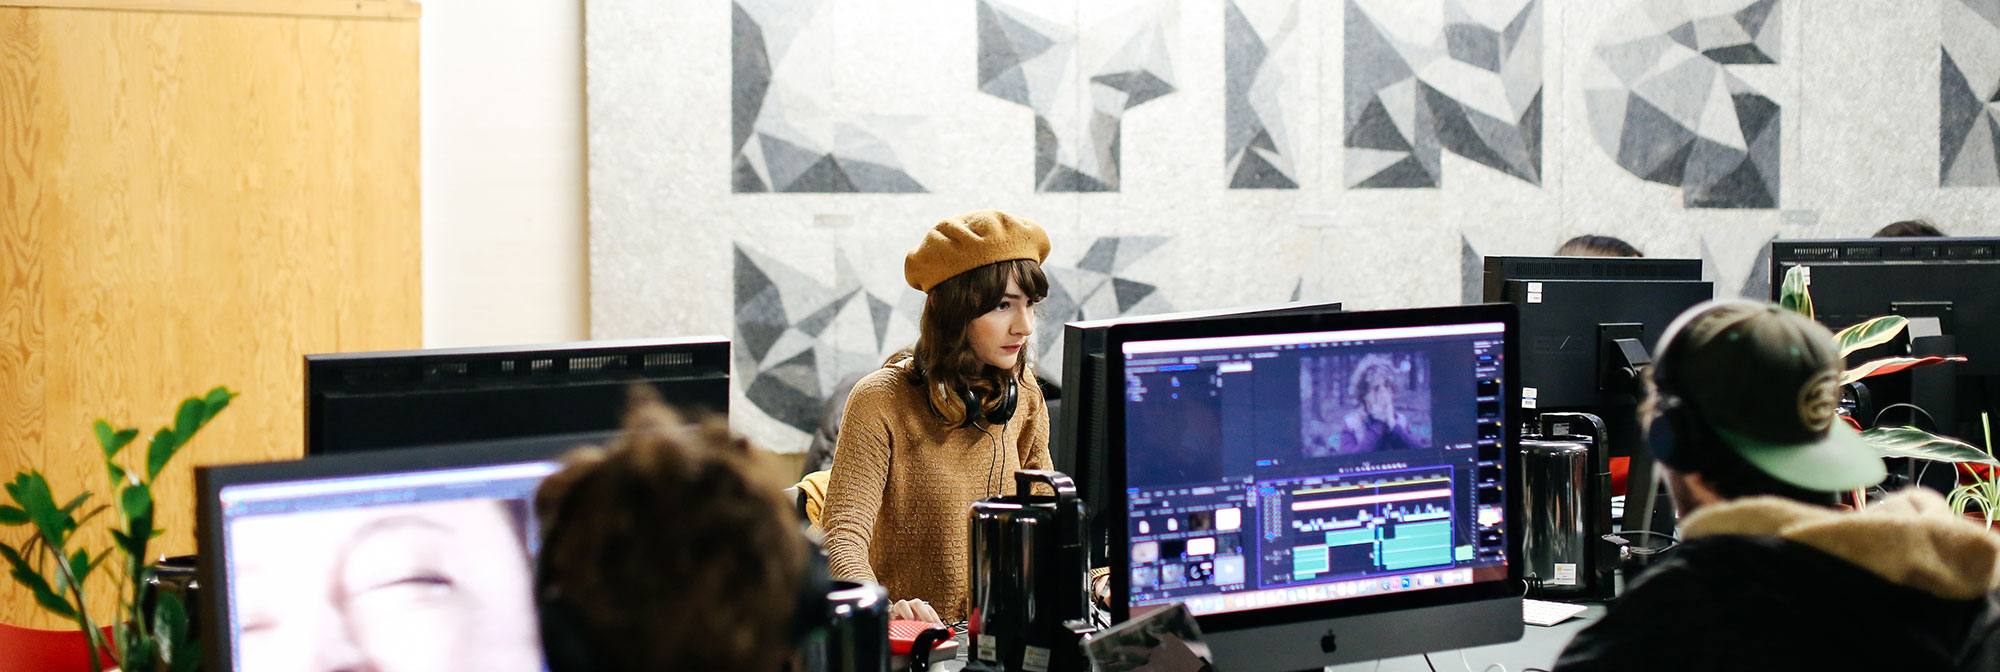 A woman in a beige beret sits at a computer screen. A man in a black cap sits with his back to the camera so that we can see his screen which shows purple and blue graphics.